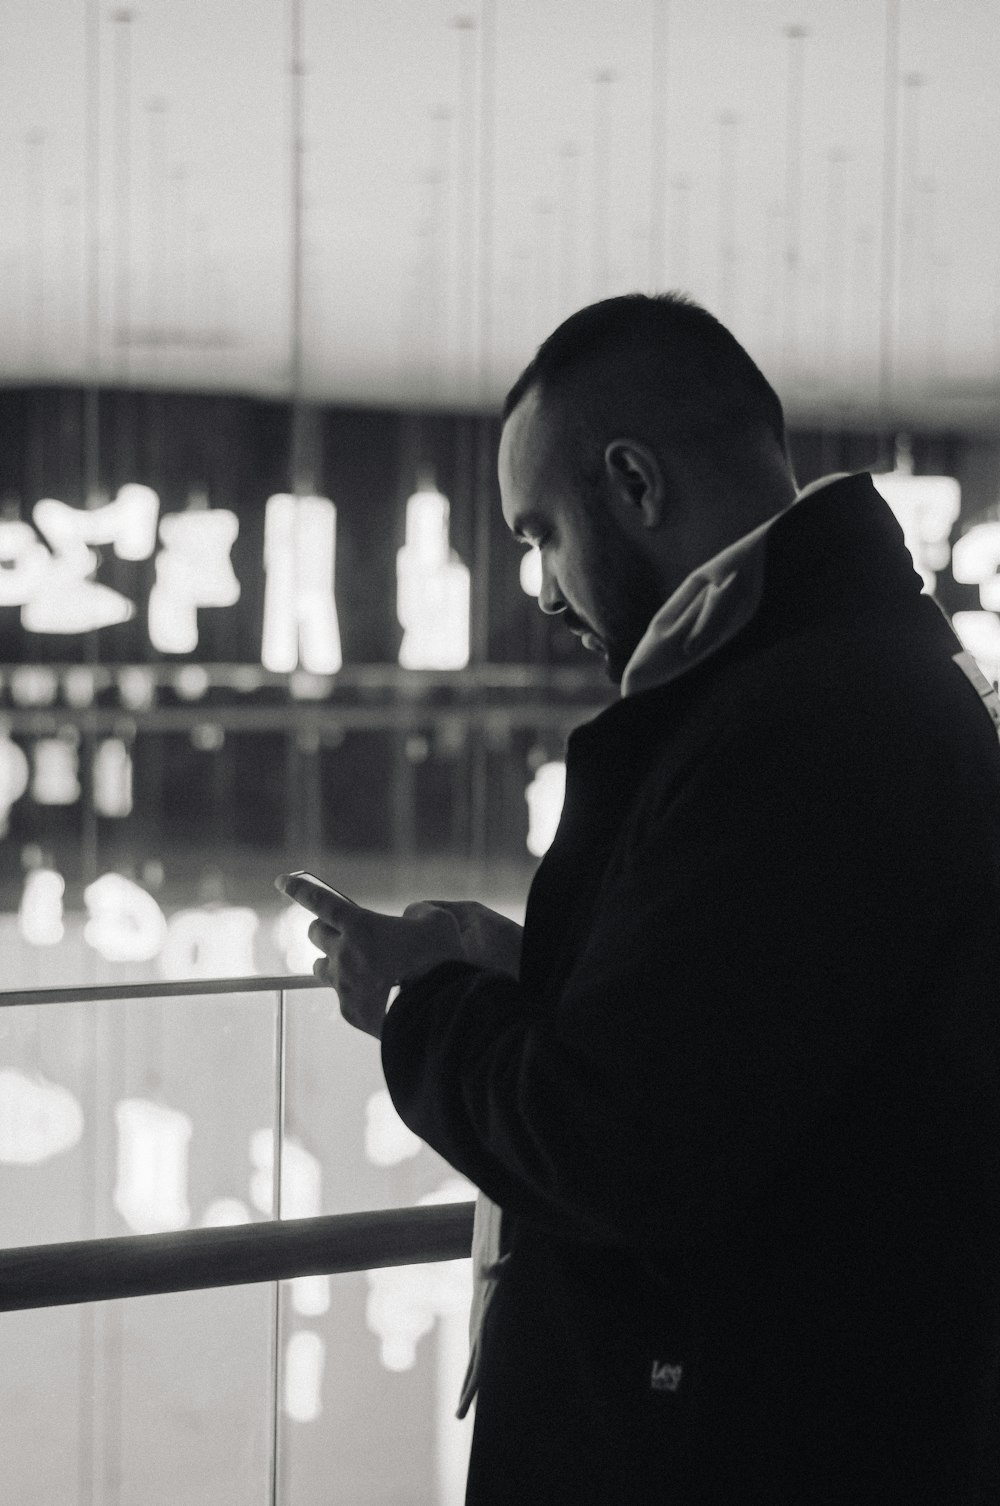 a man standing next to a window looking at his cell phone